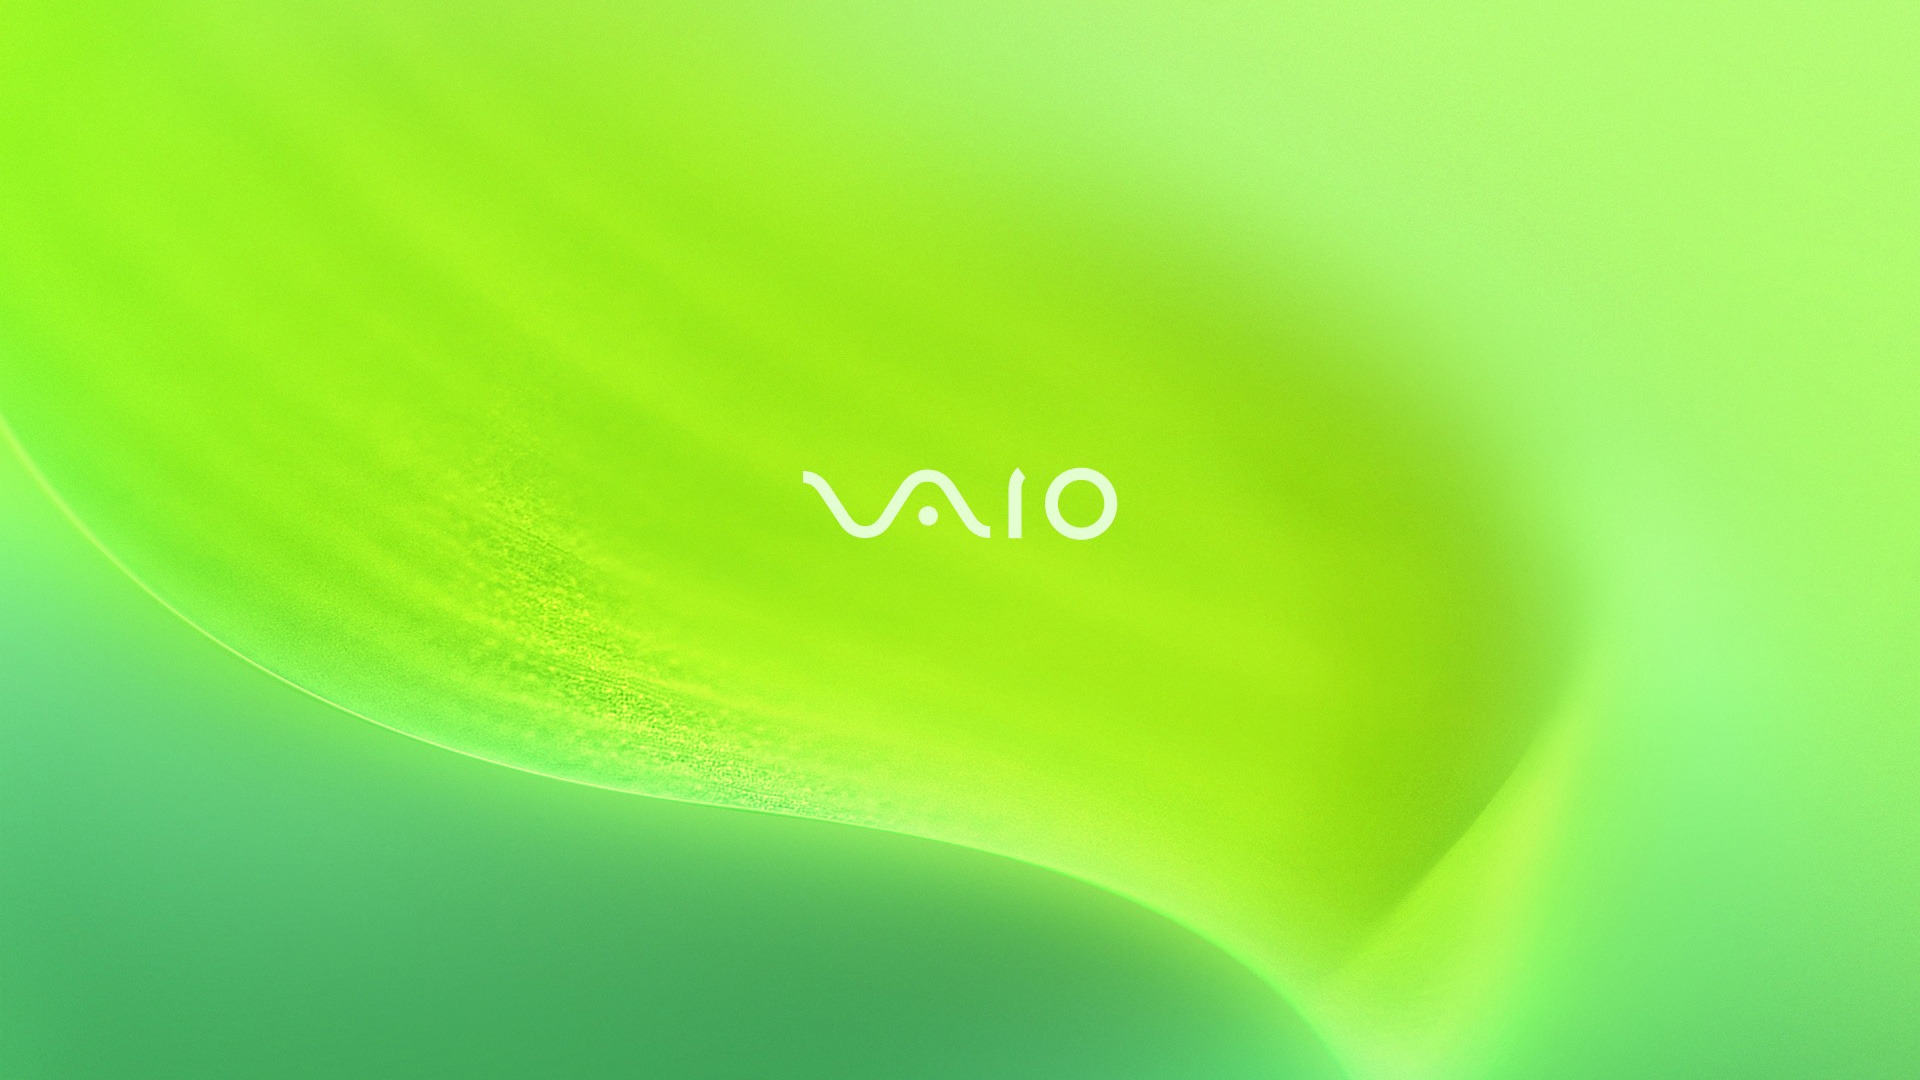 Vaio Green Leaf for 1920 x 1080 HDTV 1080p resolution